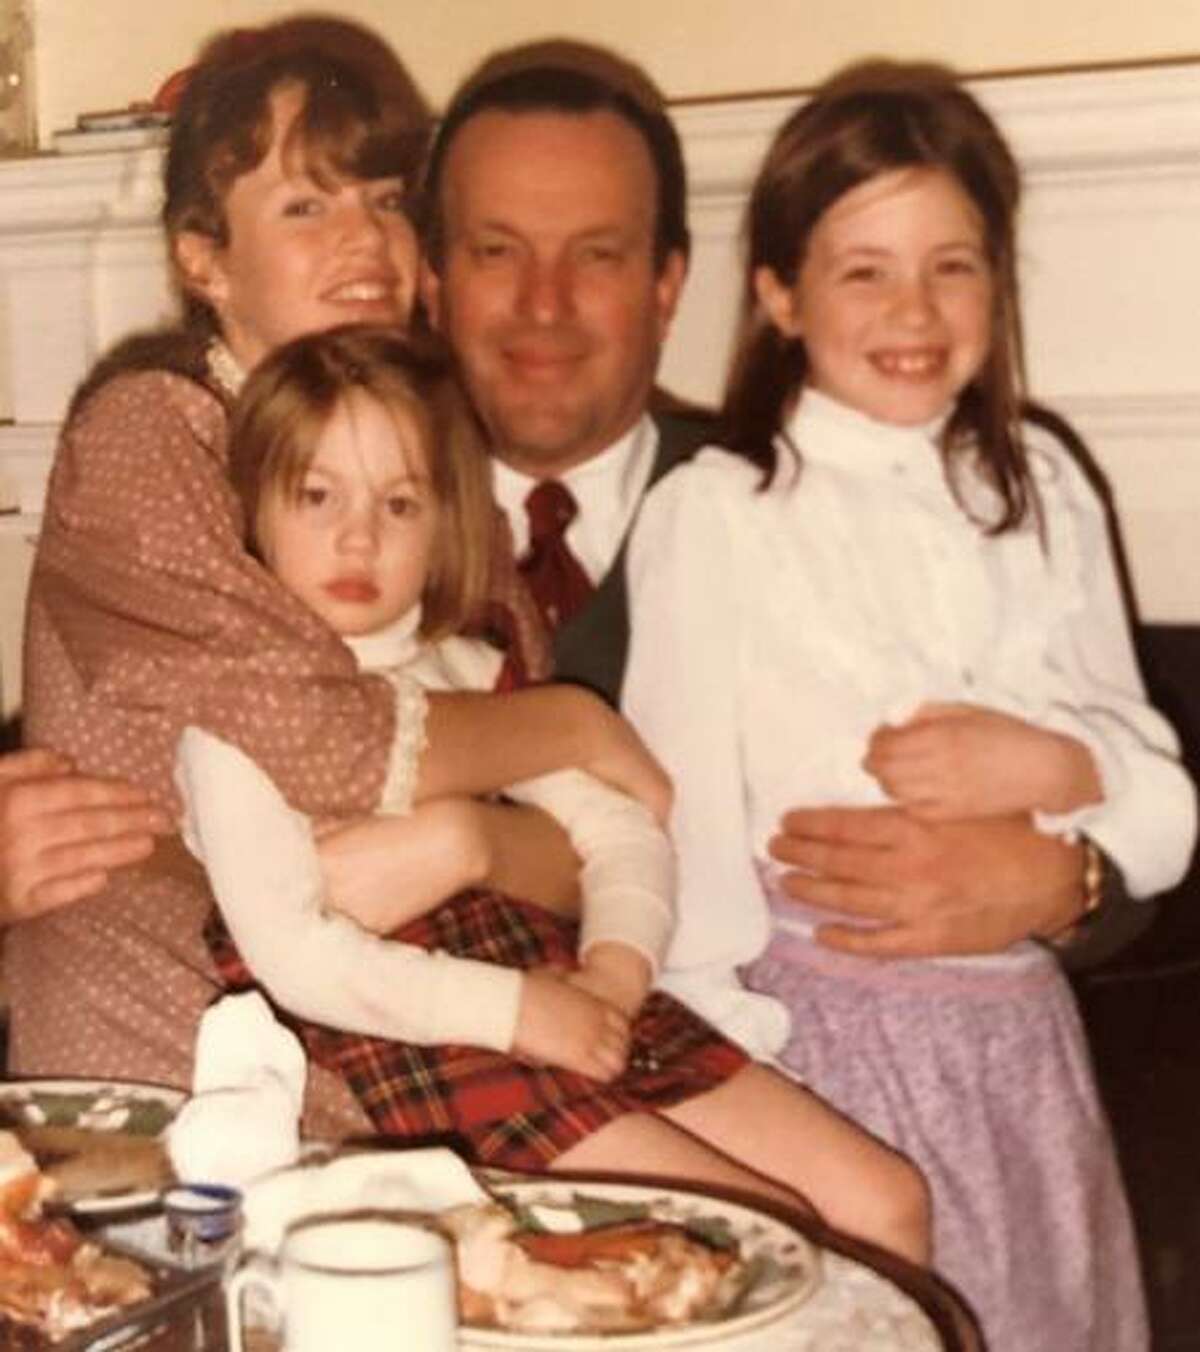 Cheever Tyler, shown with his daughters, from left, Haven, Sara and Katherine in about 1980, helped save the financially troubled Shubert Center for the Performing Arts in the 1980s and served as a civic cheerleader for New Haven. He died Friday at 81.